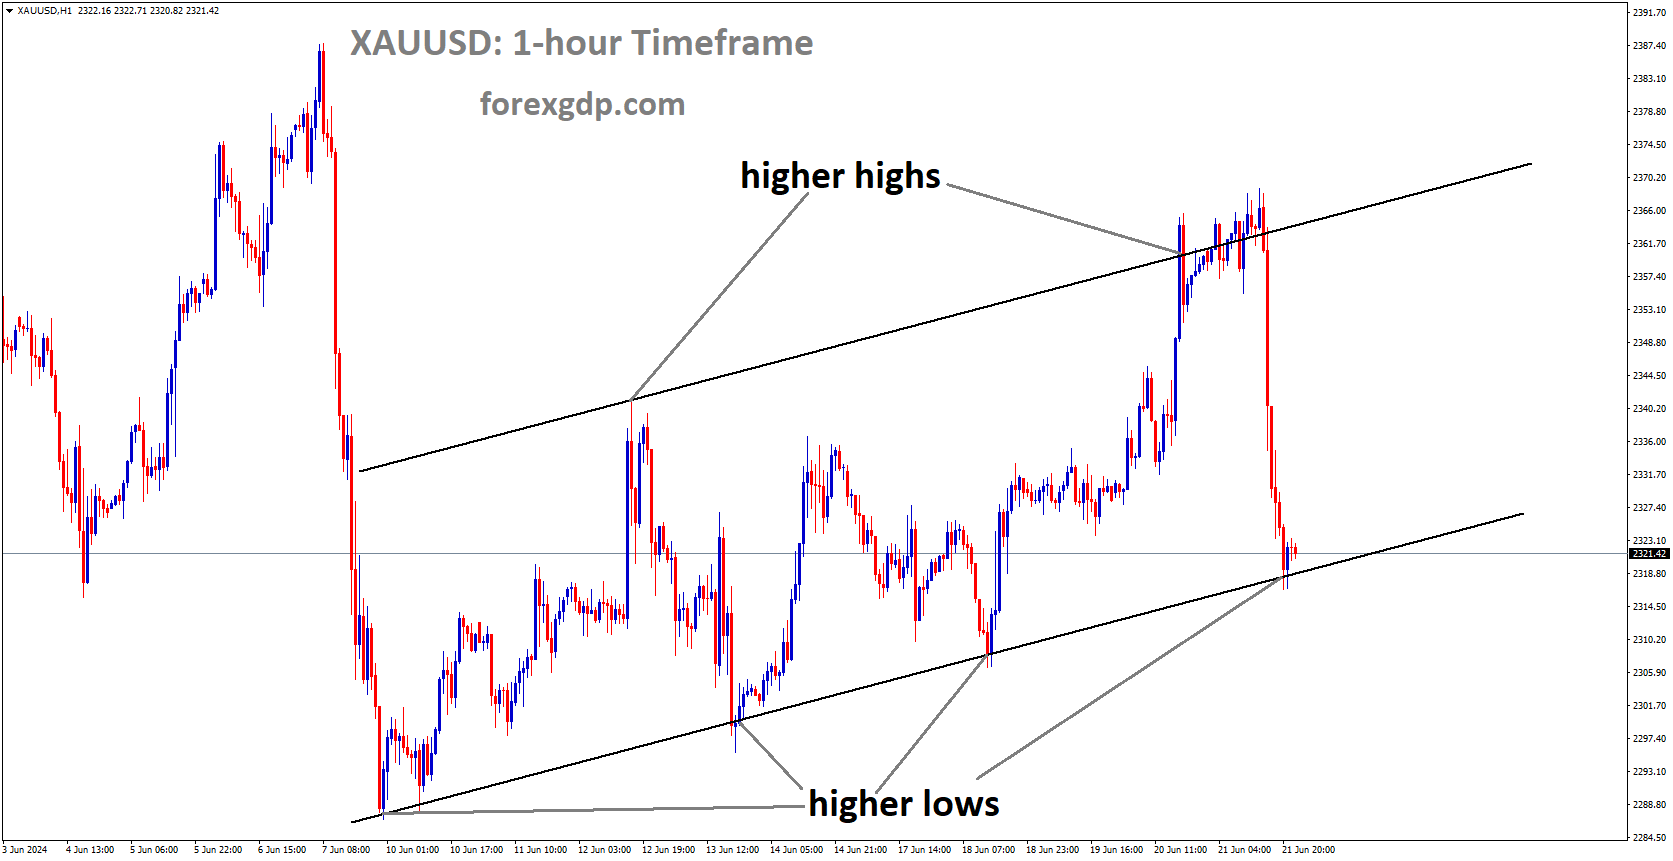 XAUUSD is moving in Ascending channel and market has reached higher low area of the channel